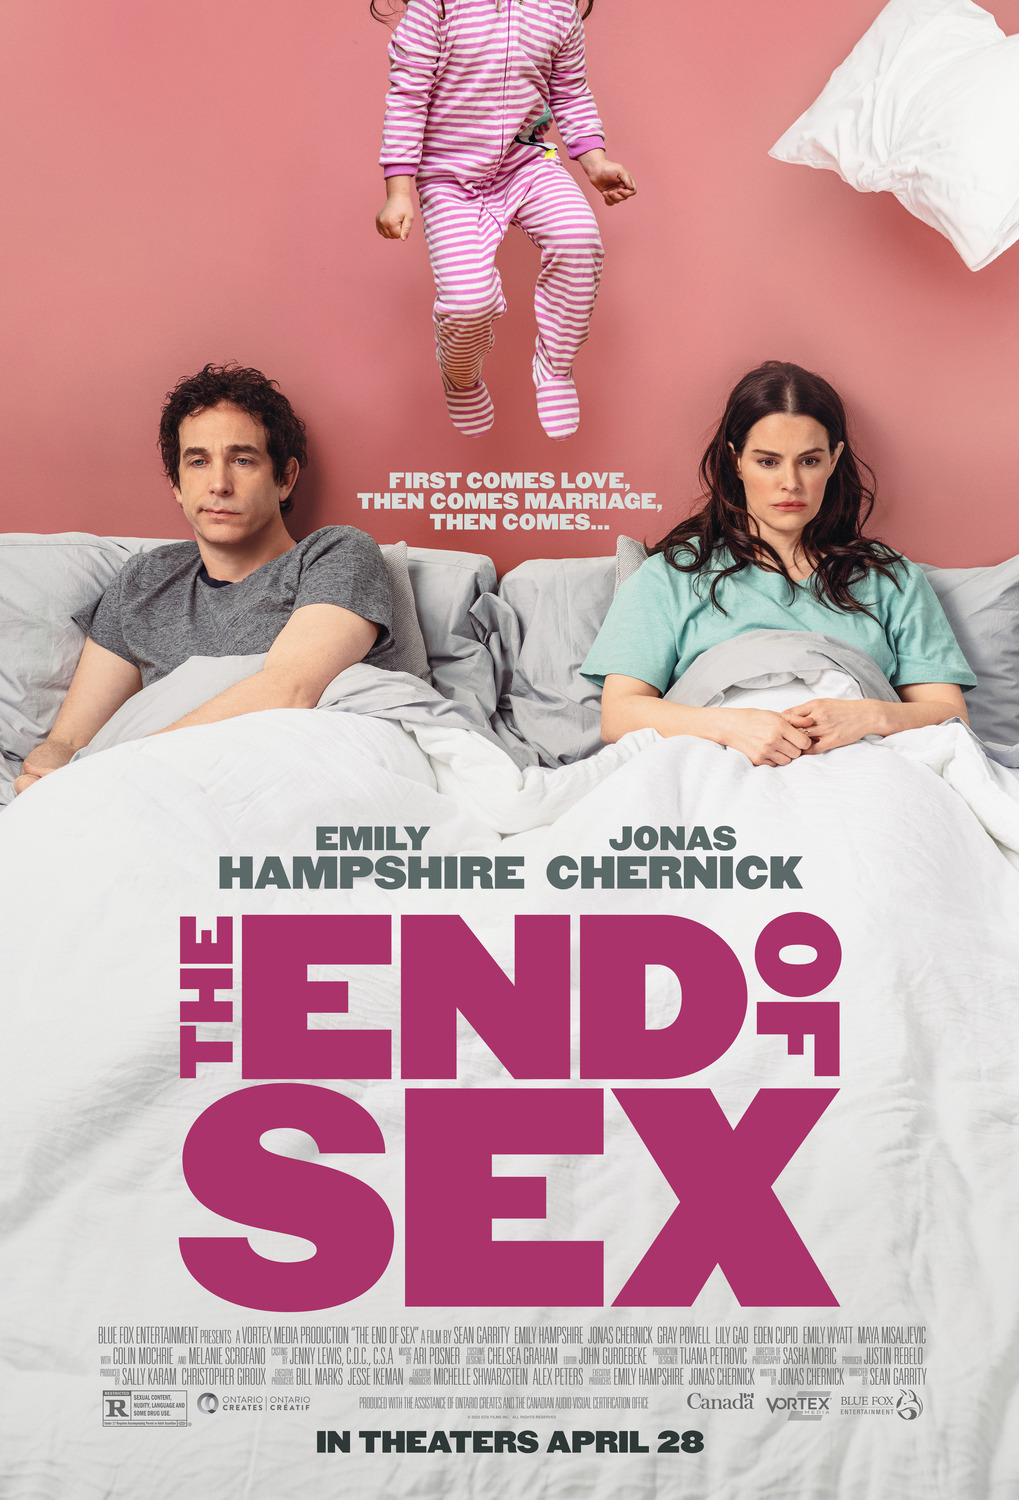 Extra Large Movie Poster Image for The End of Sex 